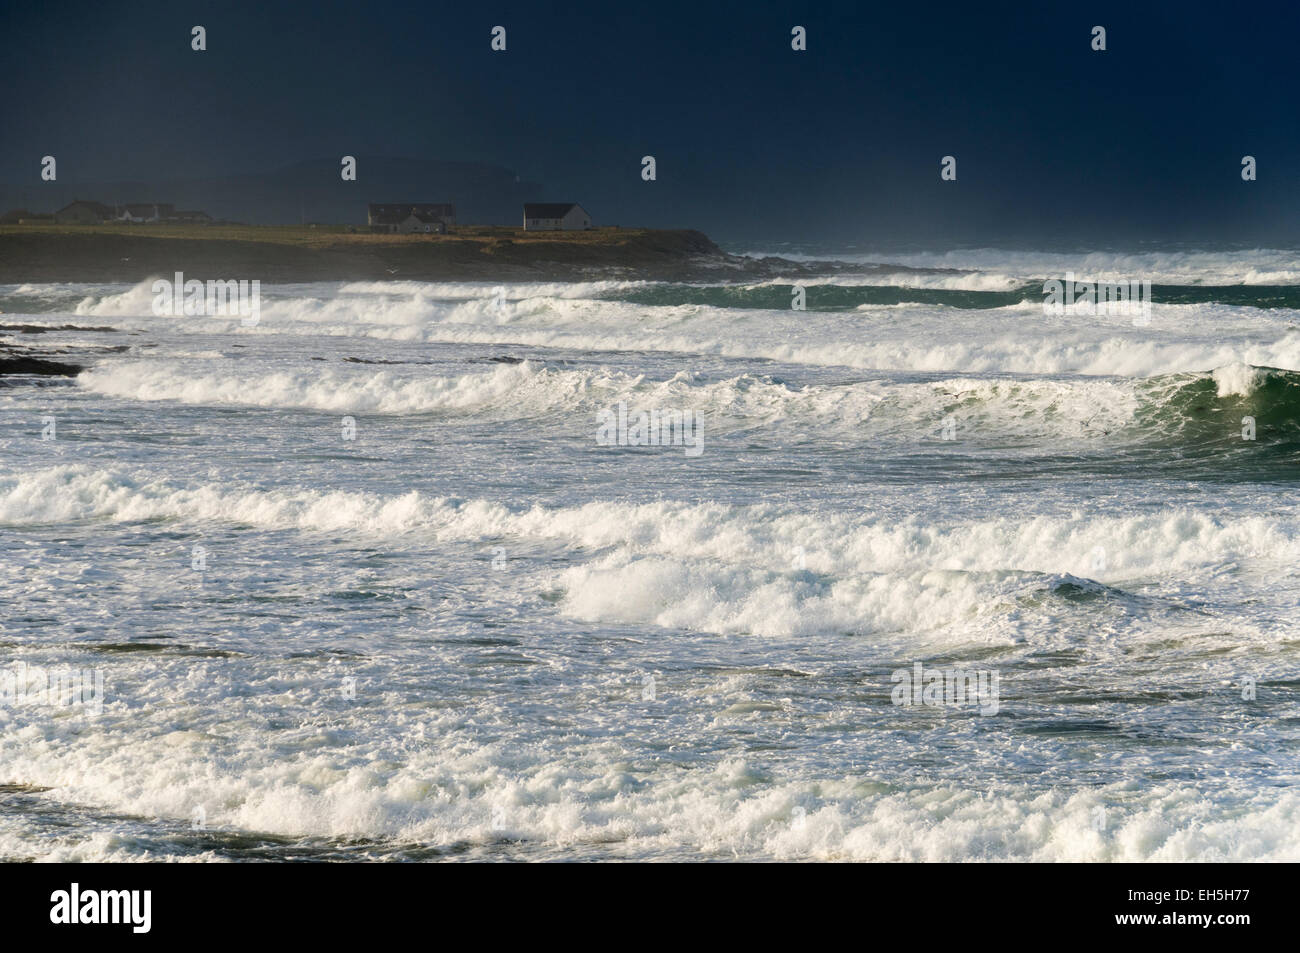 Large waves on a beach near the village of Mey, Caithness, Scotland, UK, on a very stormy day. Stock Photo